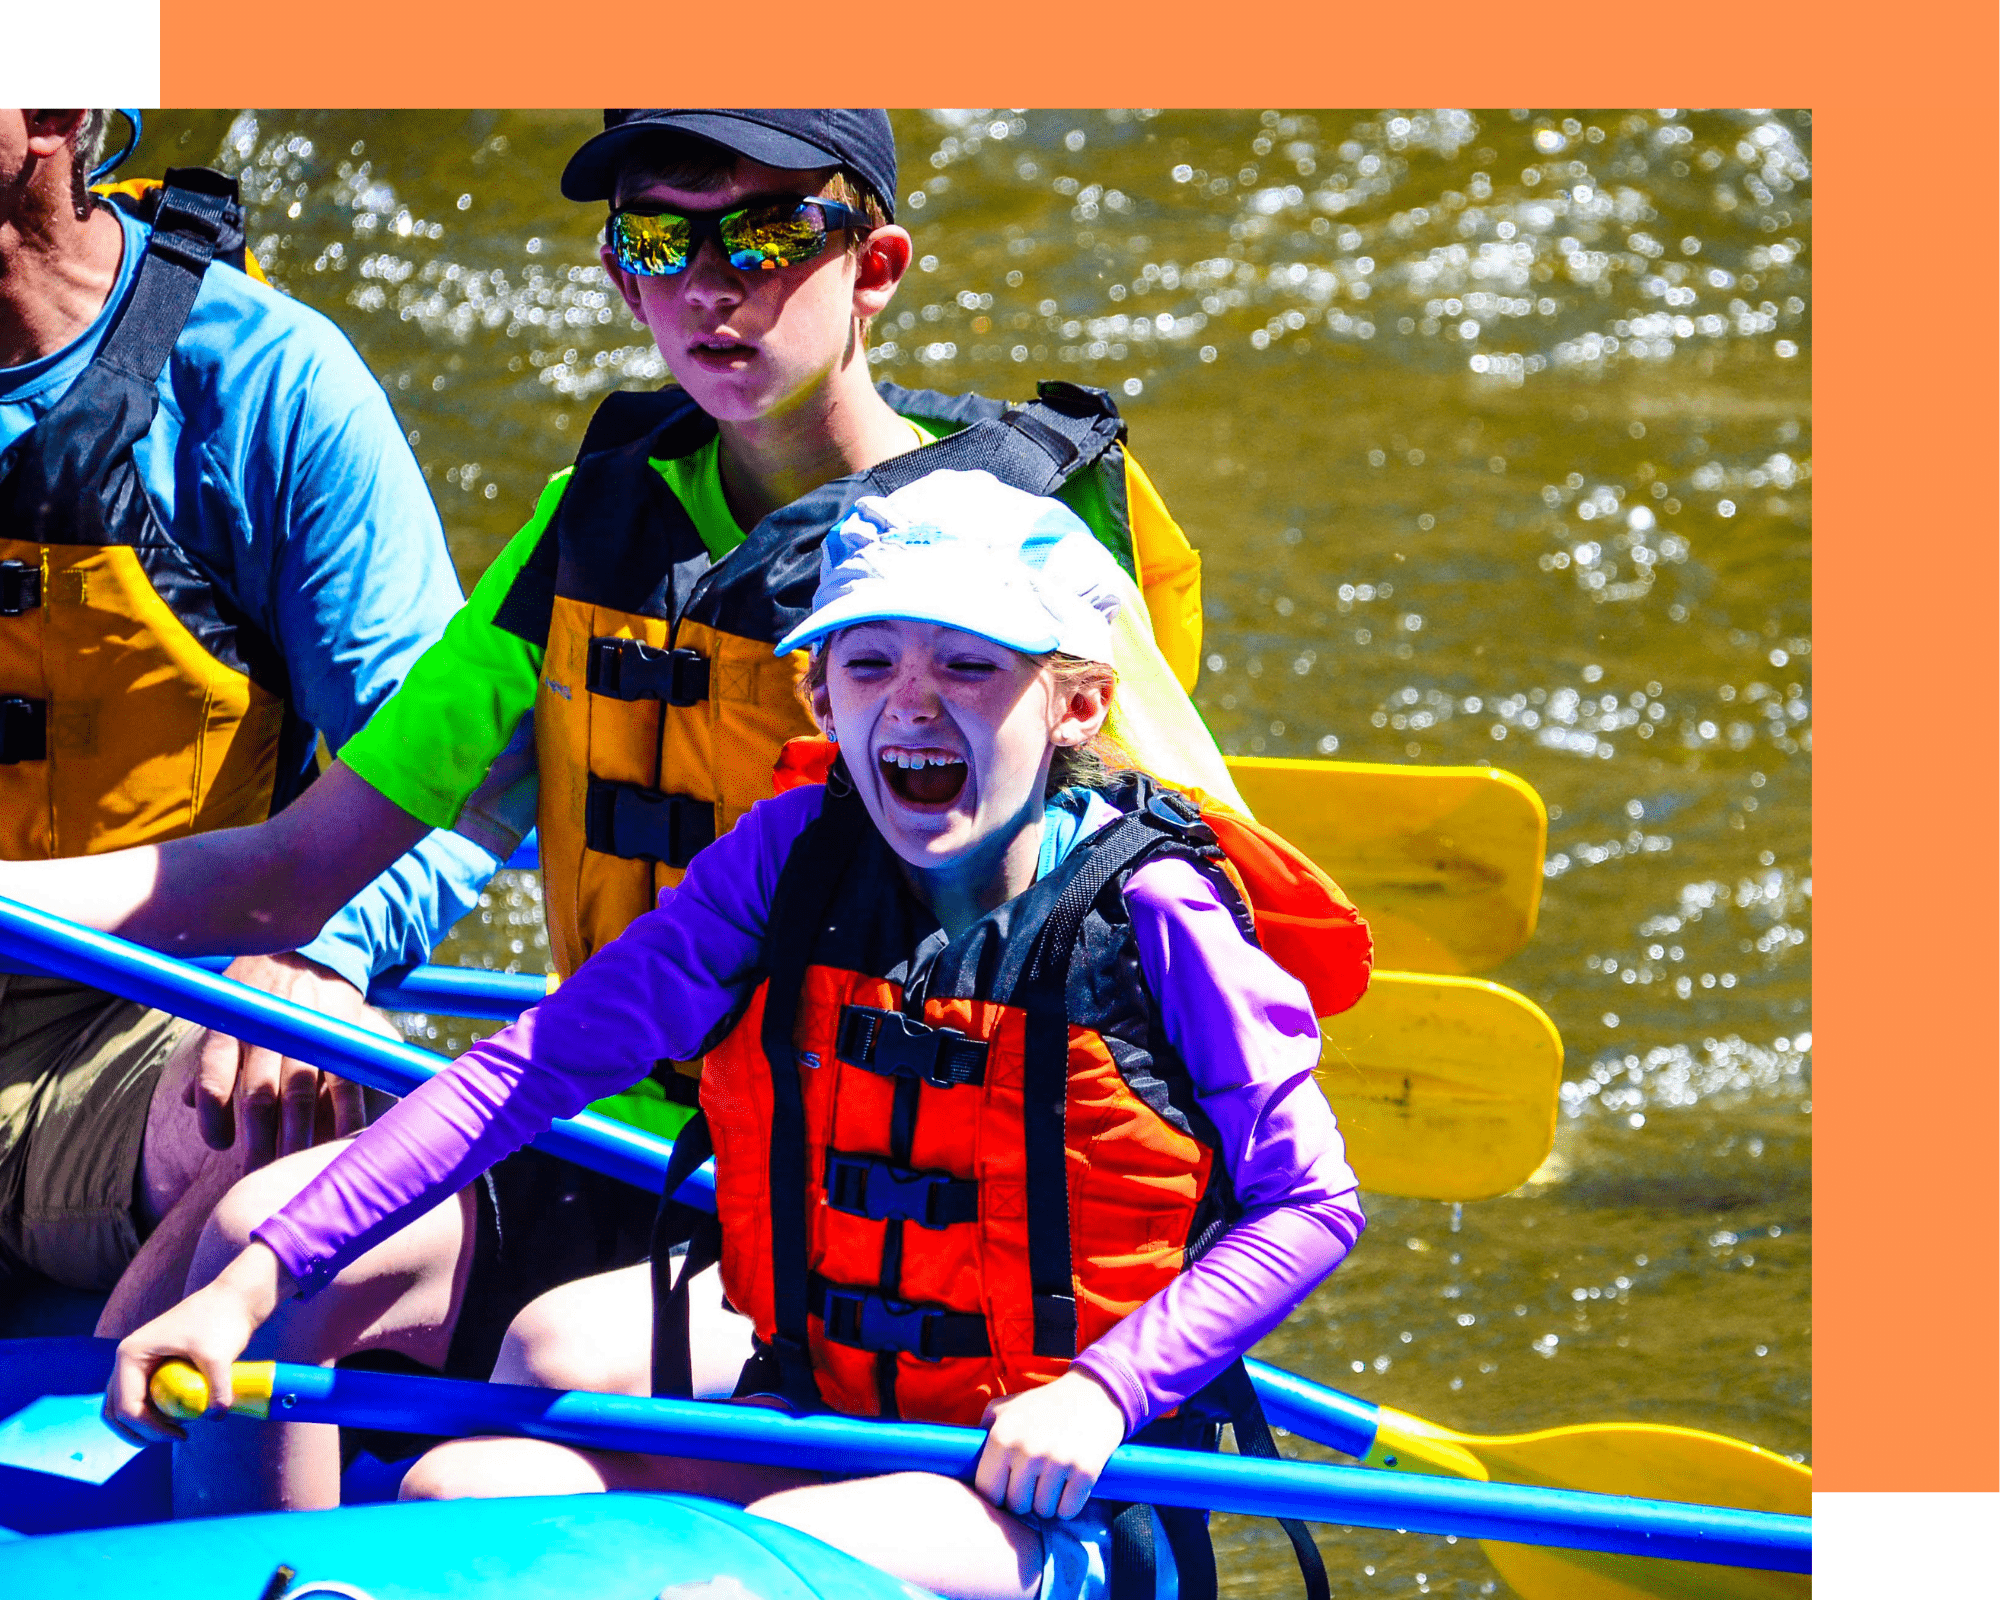 Family Whitewater Rafting in Vail Colorado